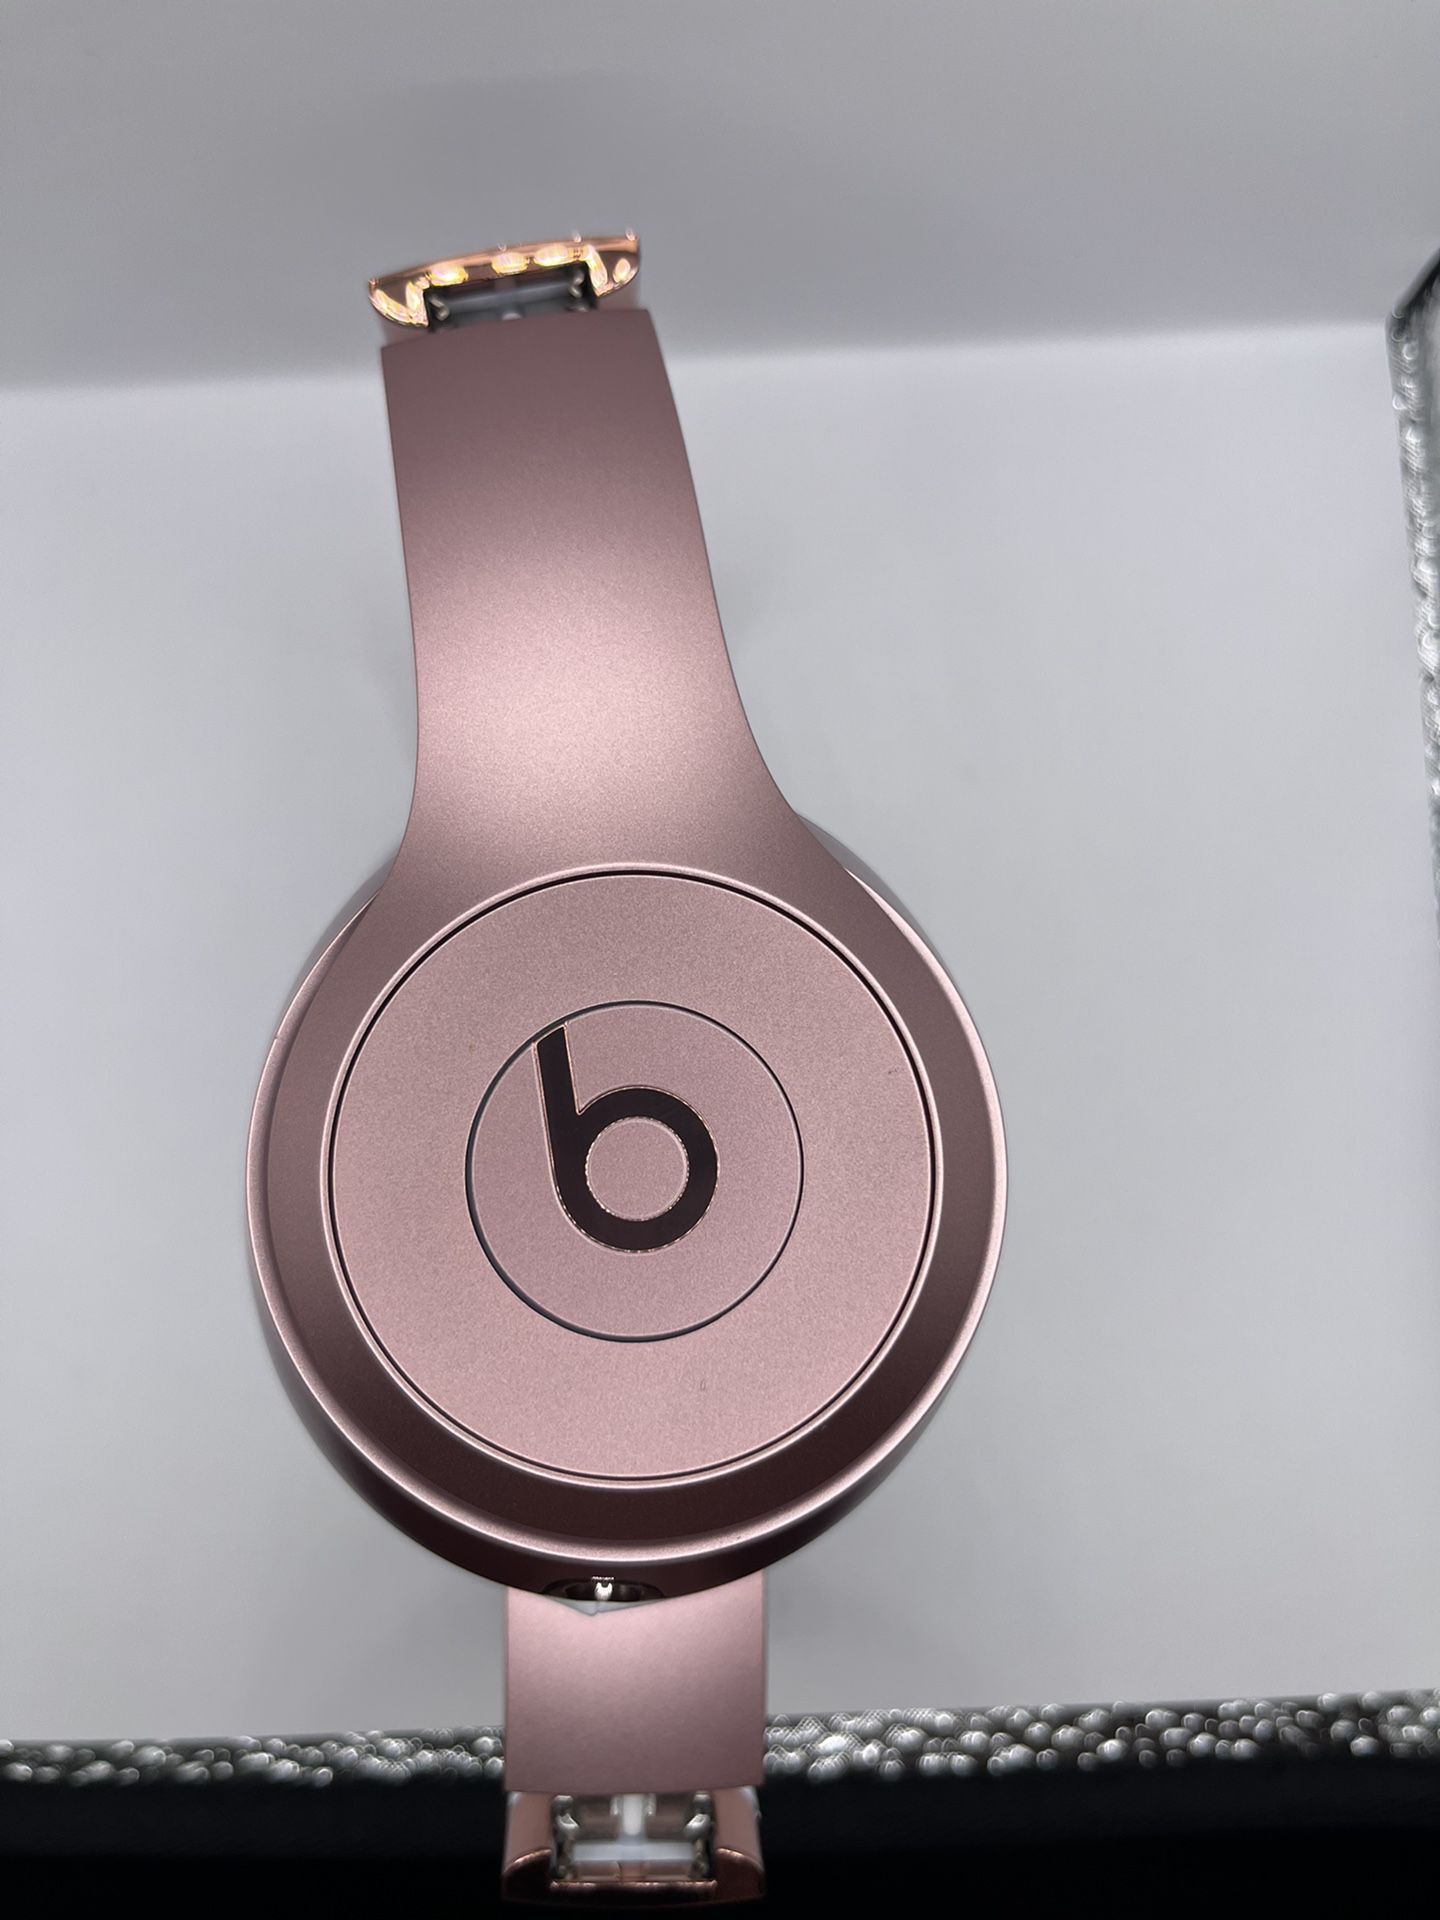 Beats Solo3 Wireless On-Ear Headphones - Apple W1 Headphone Chip, Class 1 Bluetooth, 40 Hours of Listening Time, Built-in Microphone - Rose Gold (Late